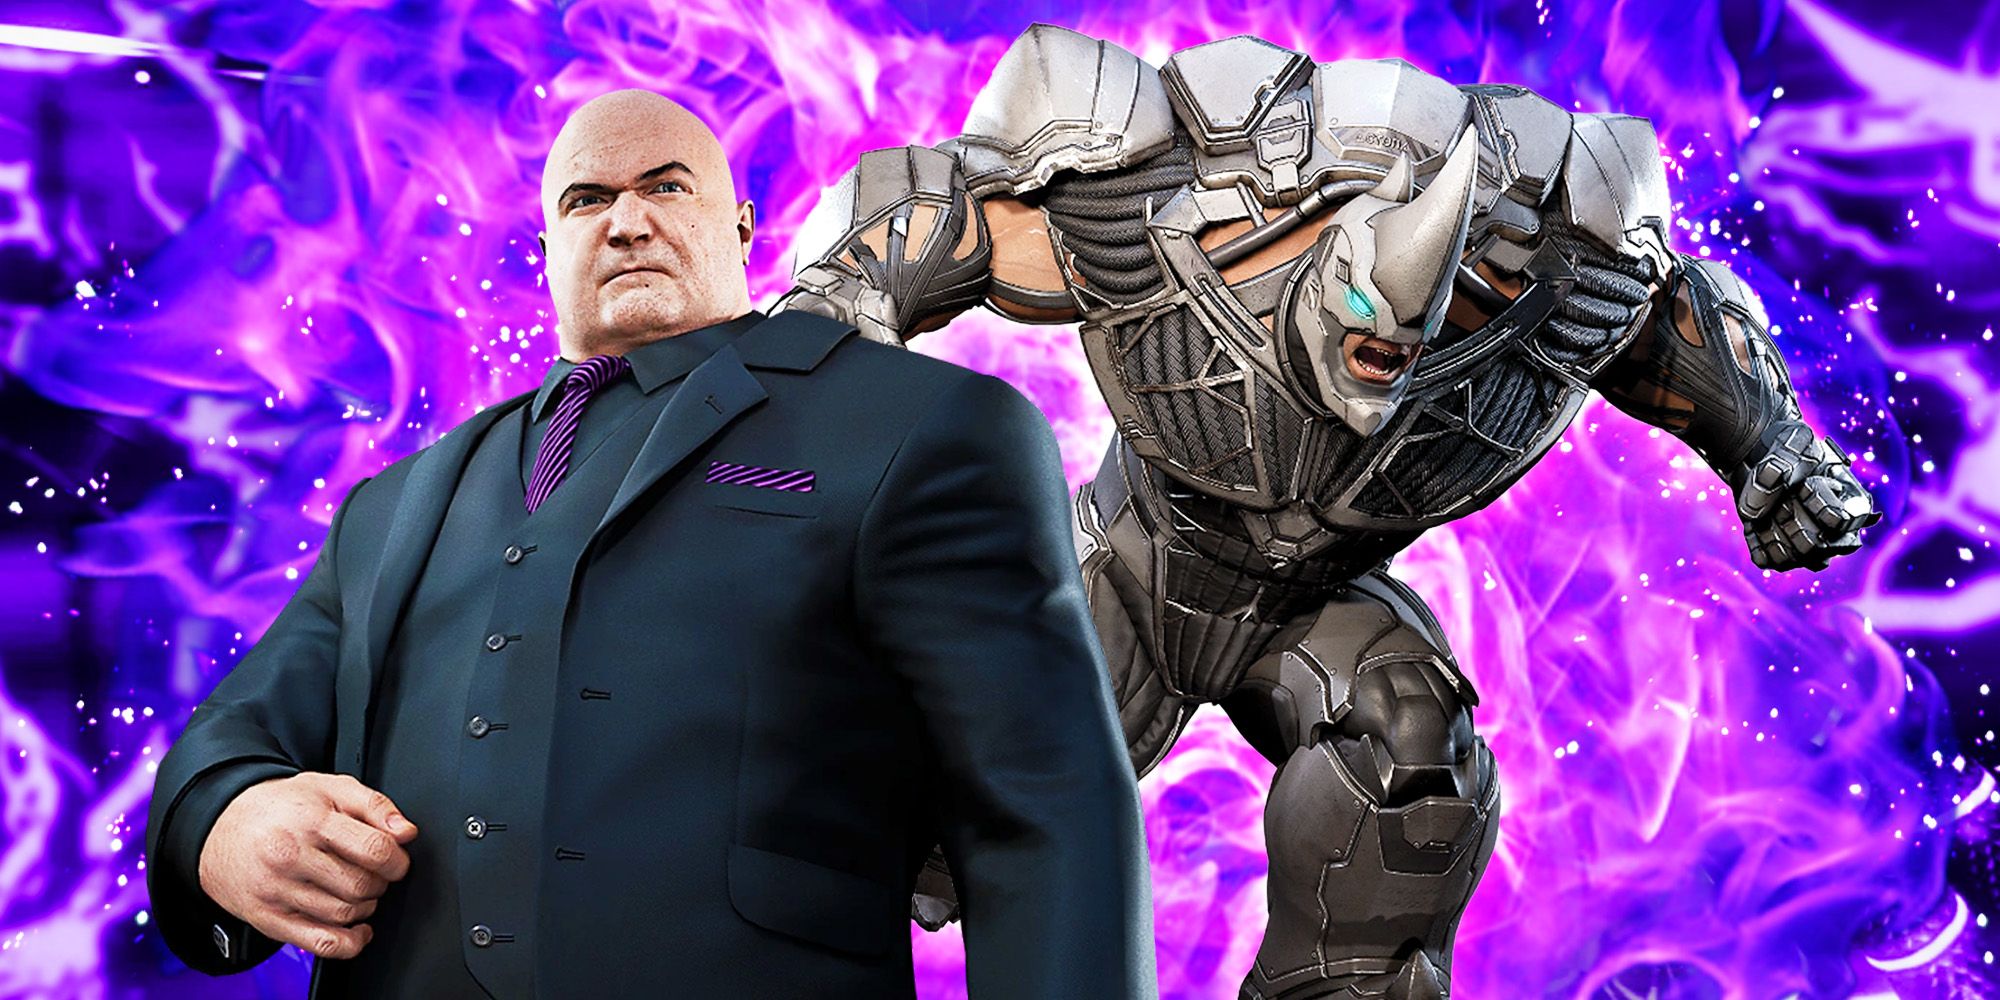 Wilson Fisk, aka Kingpin, and Rhino, from Marvel's Spider-Man: Miles Morales, posing in front of a bright purple background.